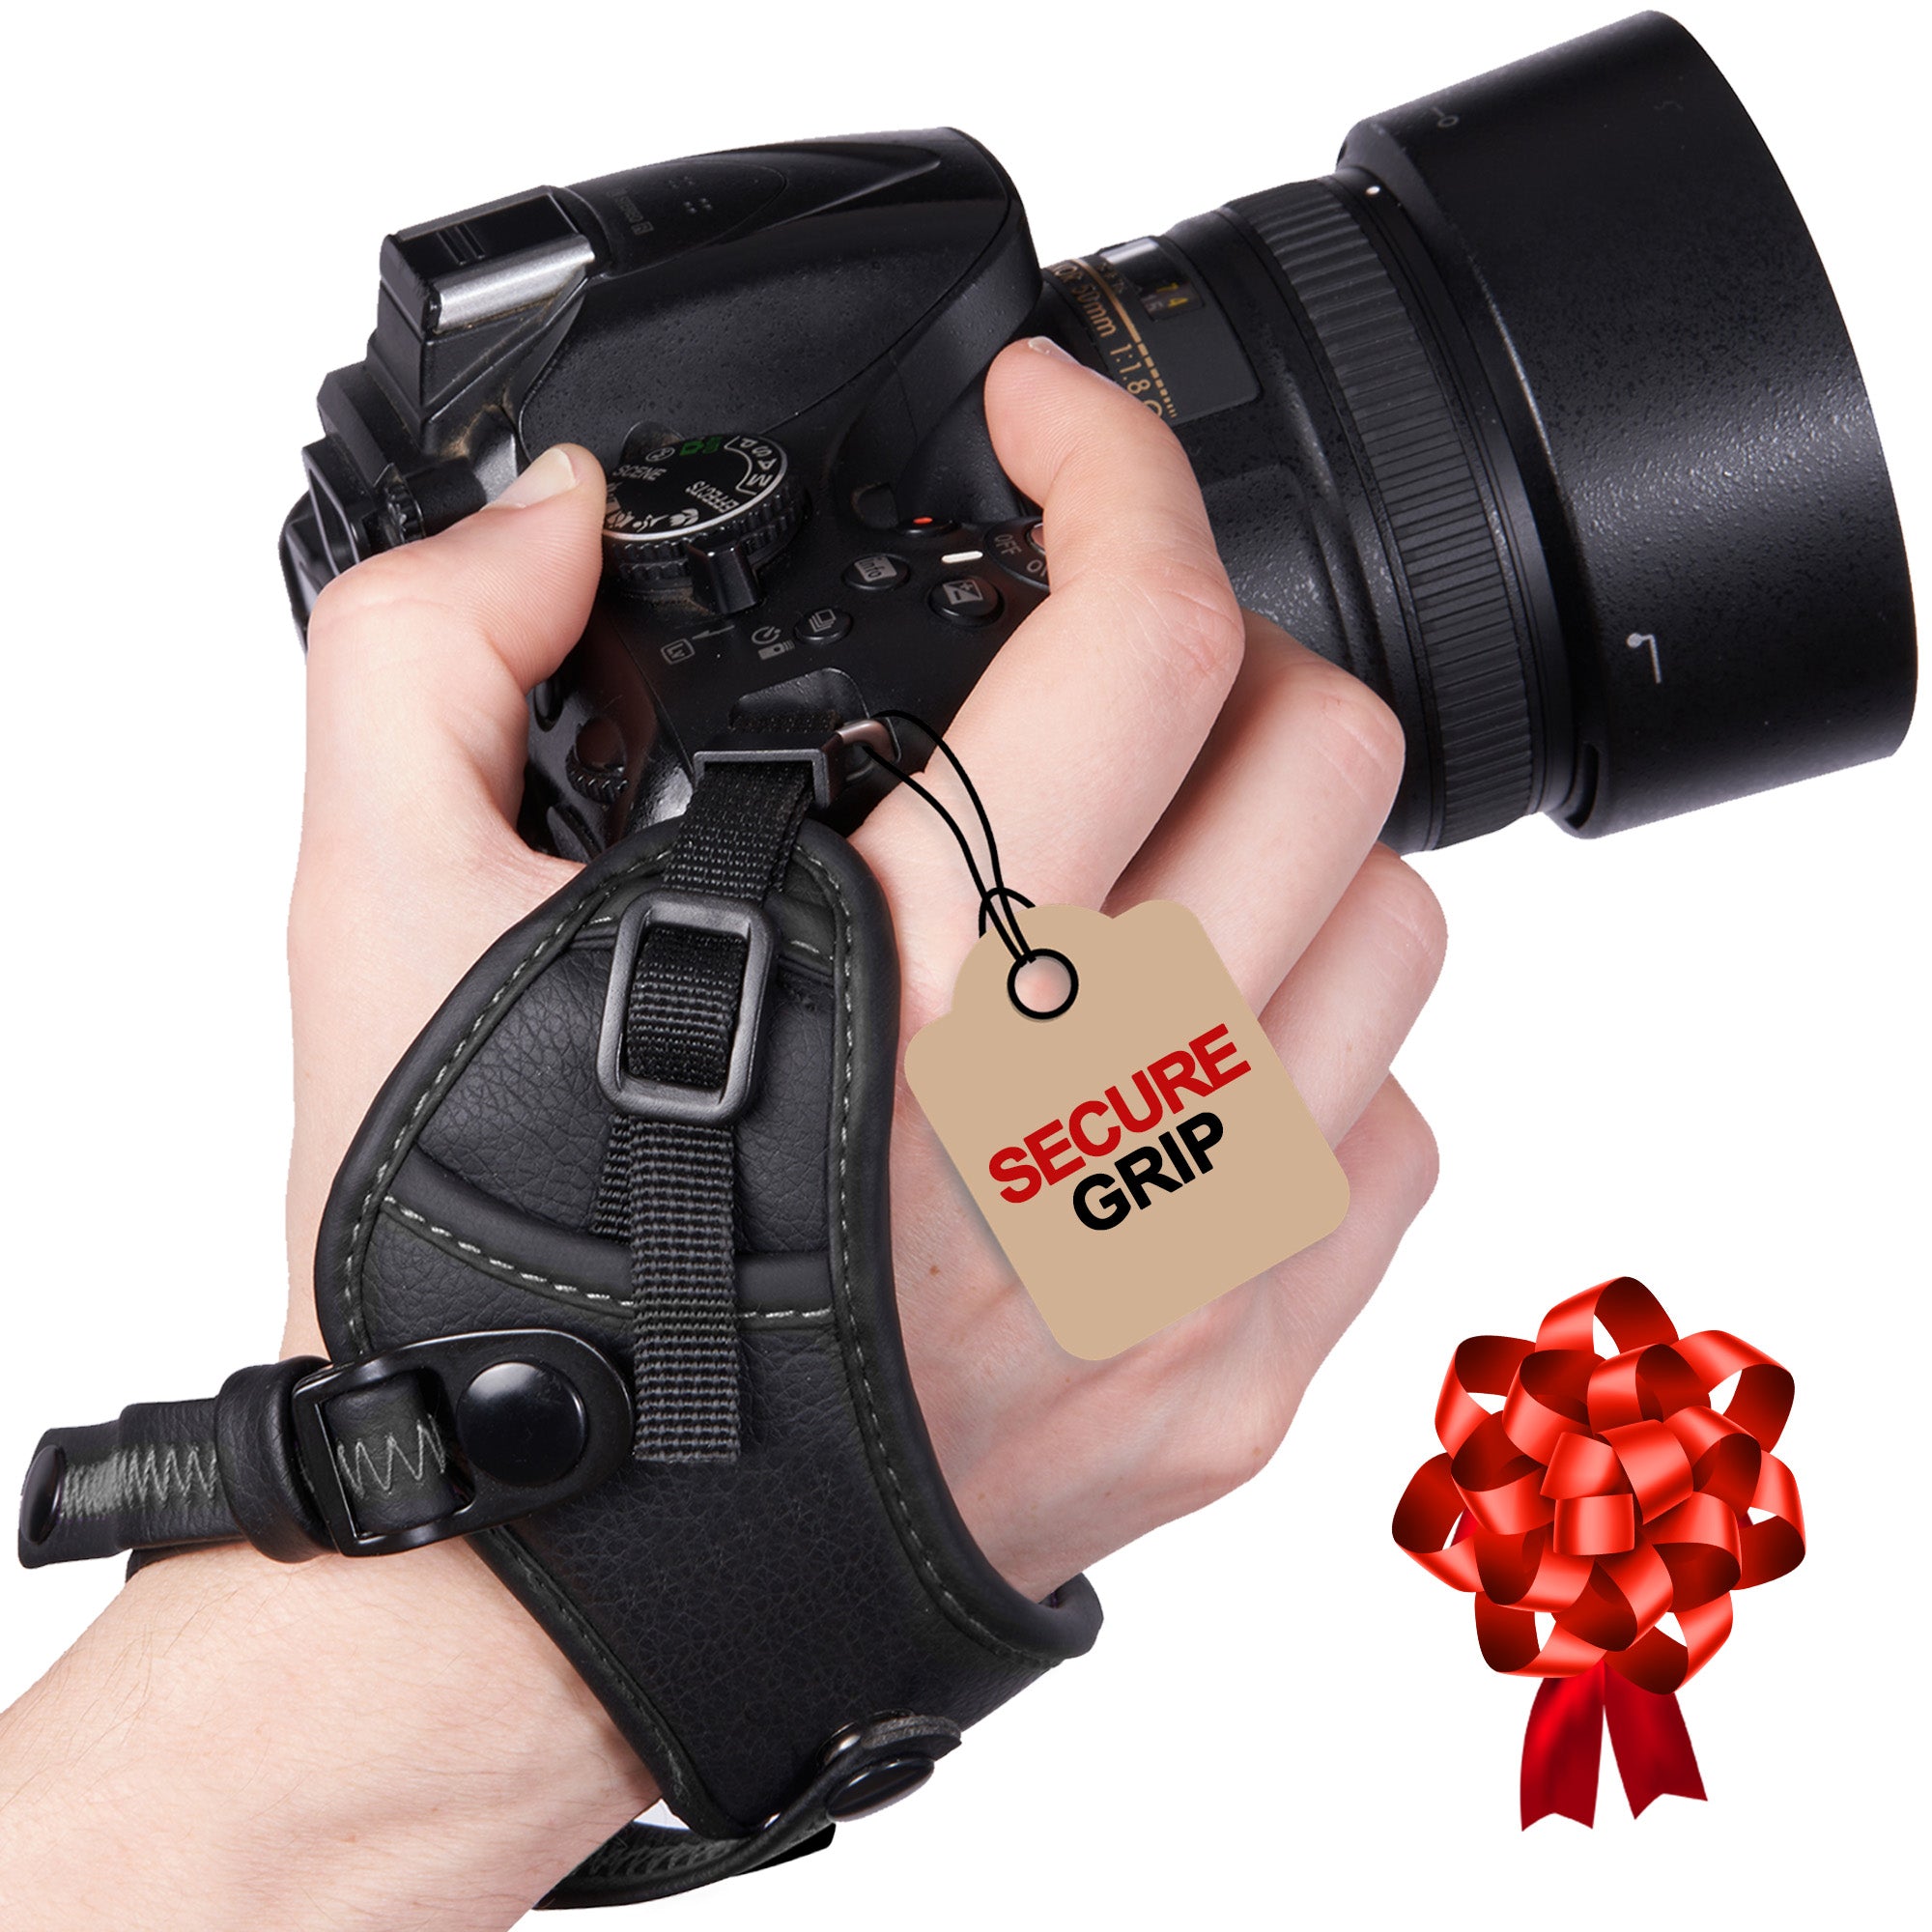 Camera Hand Strap, Comfortable Secure Grip, Compatible with Mirrorless and DSLR Cameras, Steady Support Wrist Straps.